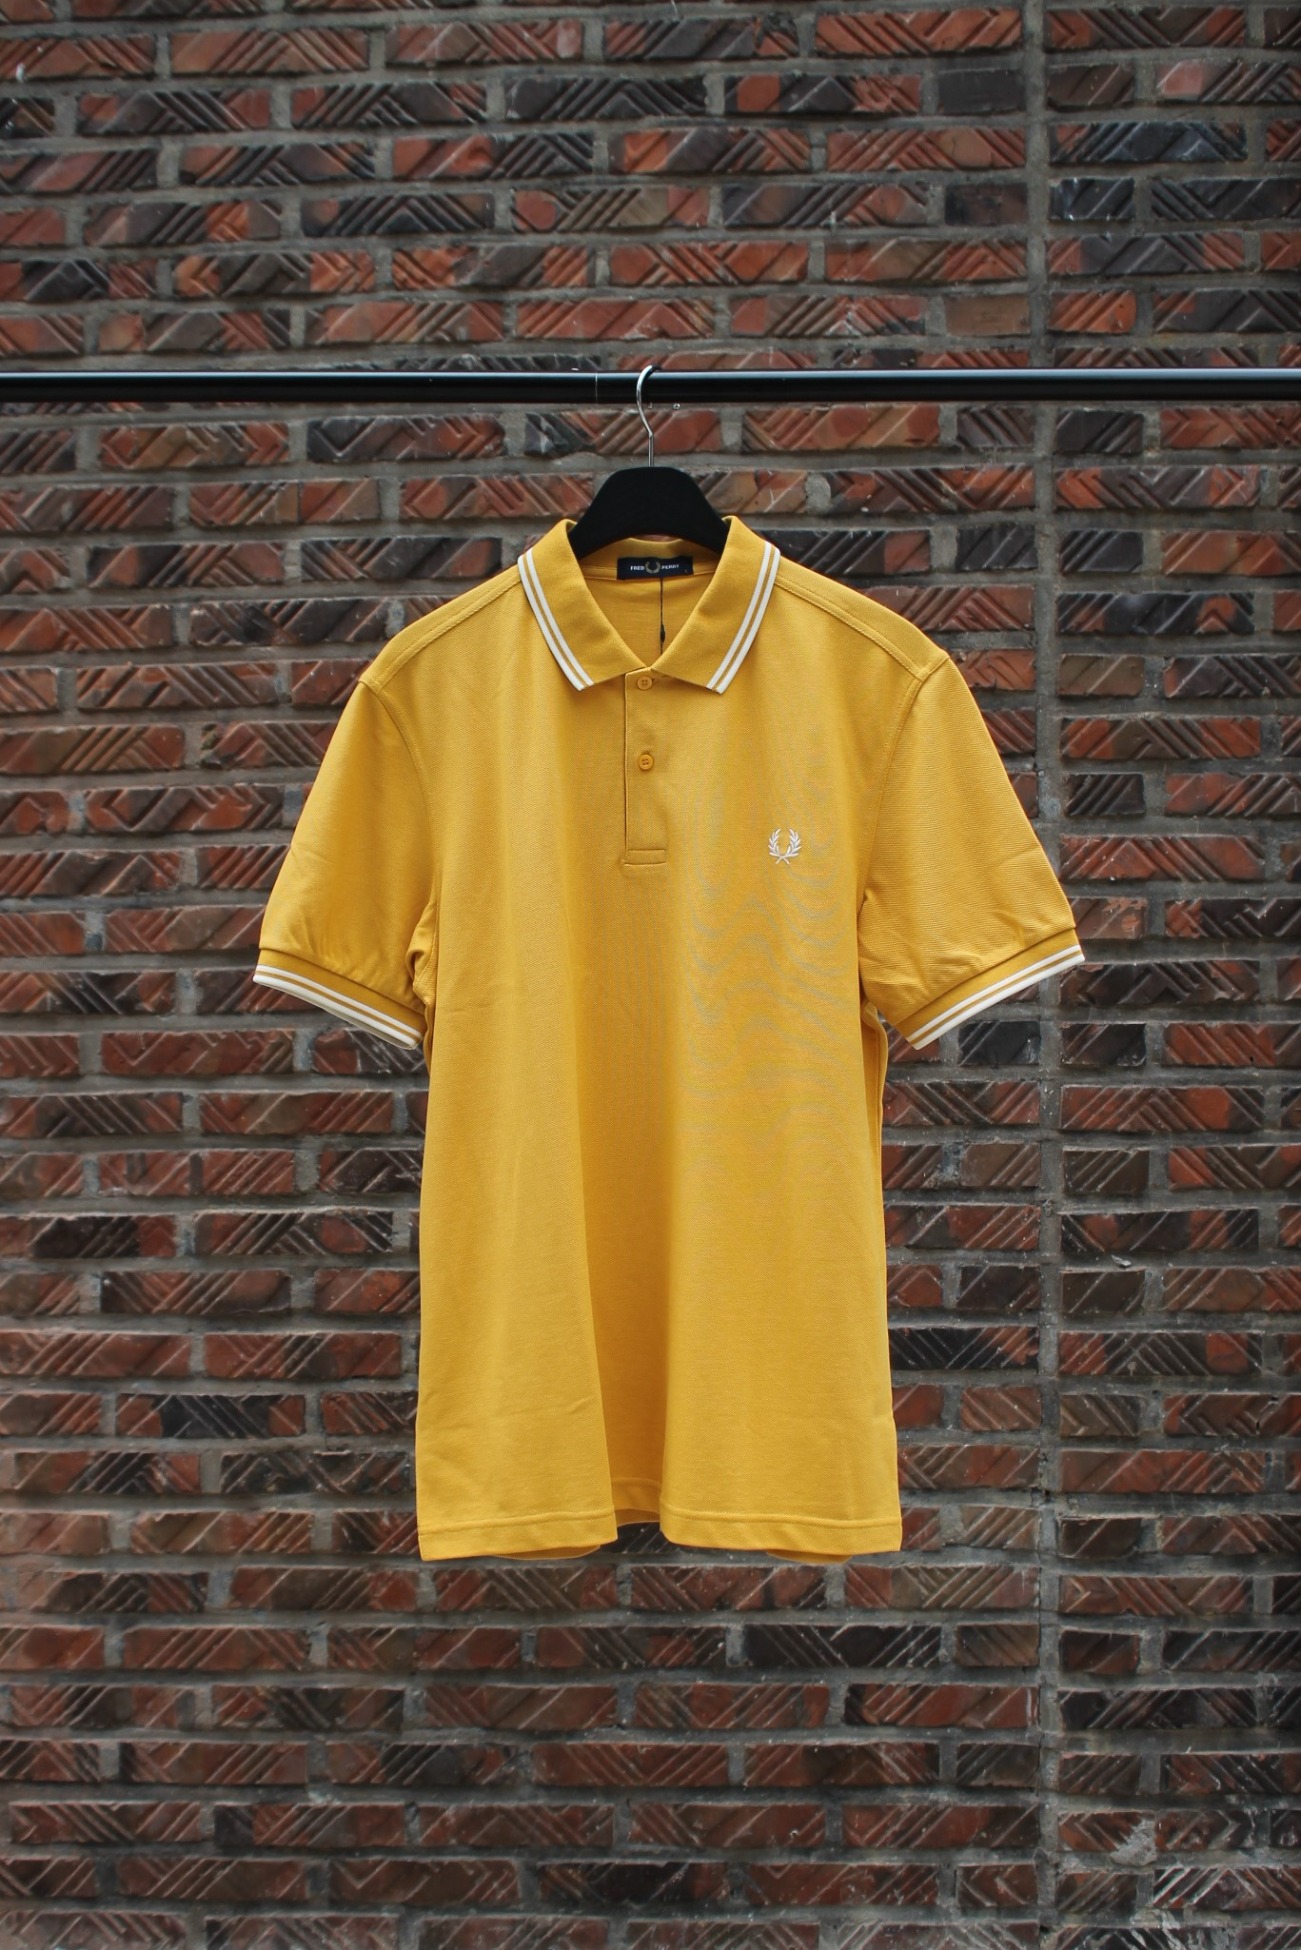 [FRED PERRY] Twin Tipped Fred Perry Shirt - Gold / Snow White